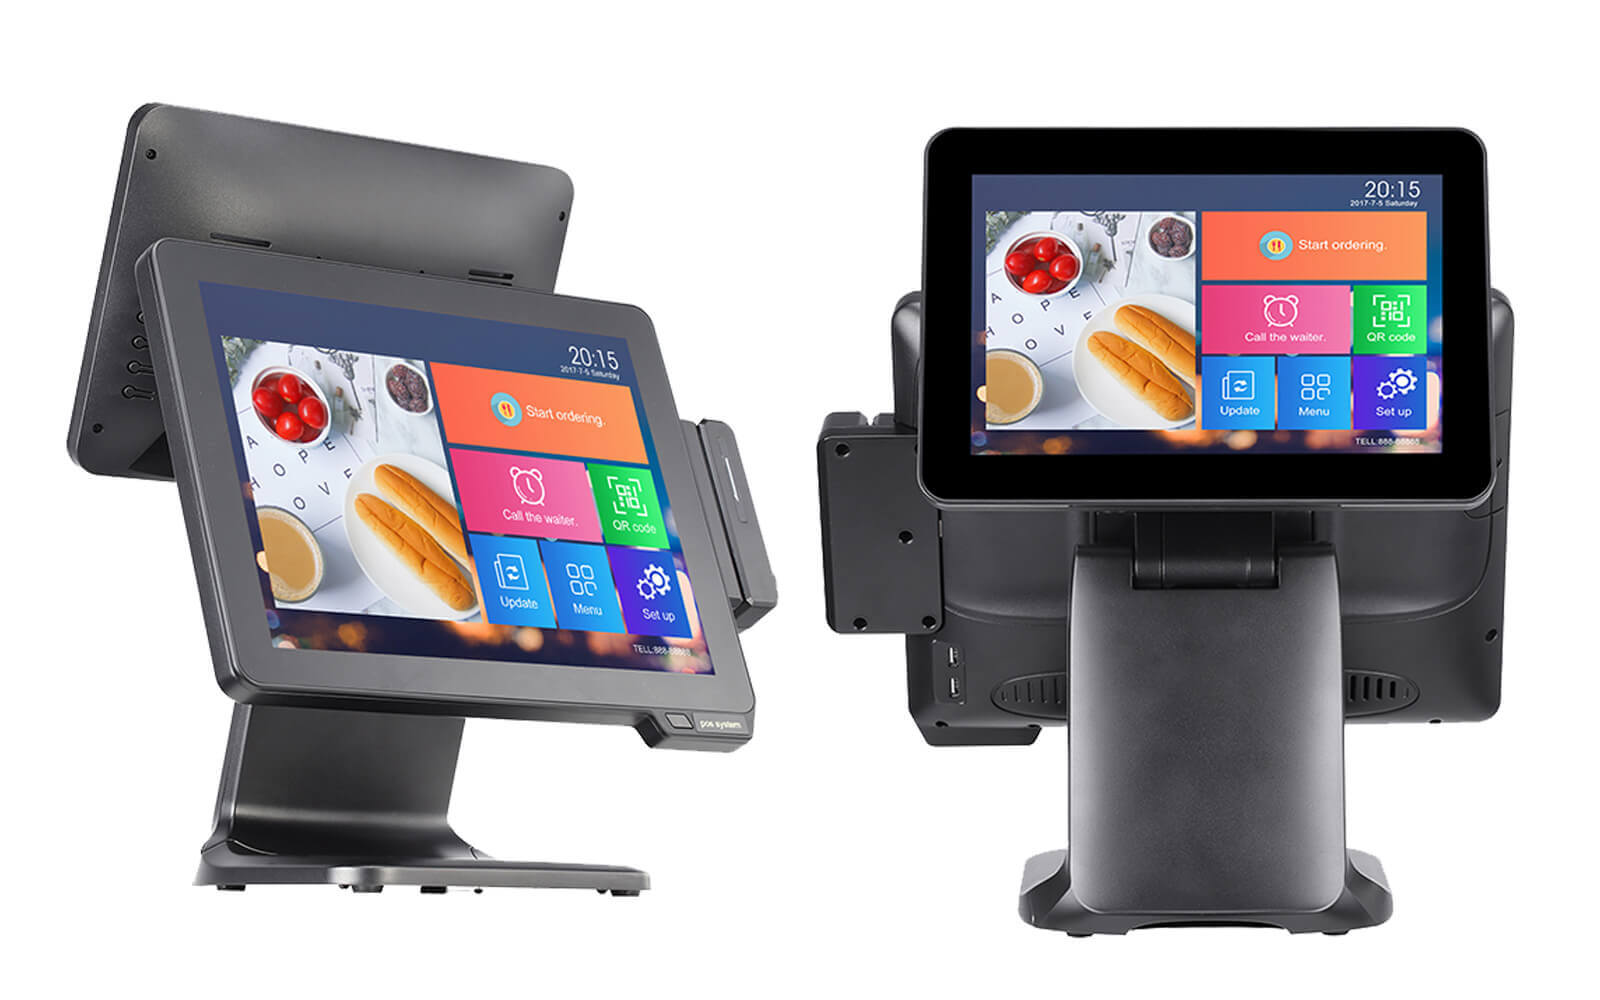 MUNBYN IZP009 All in One Touch POS System